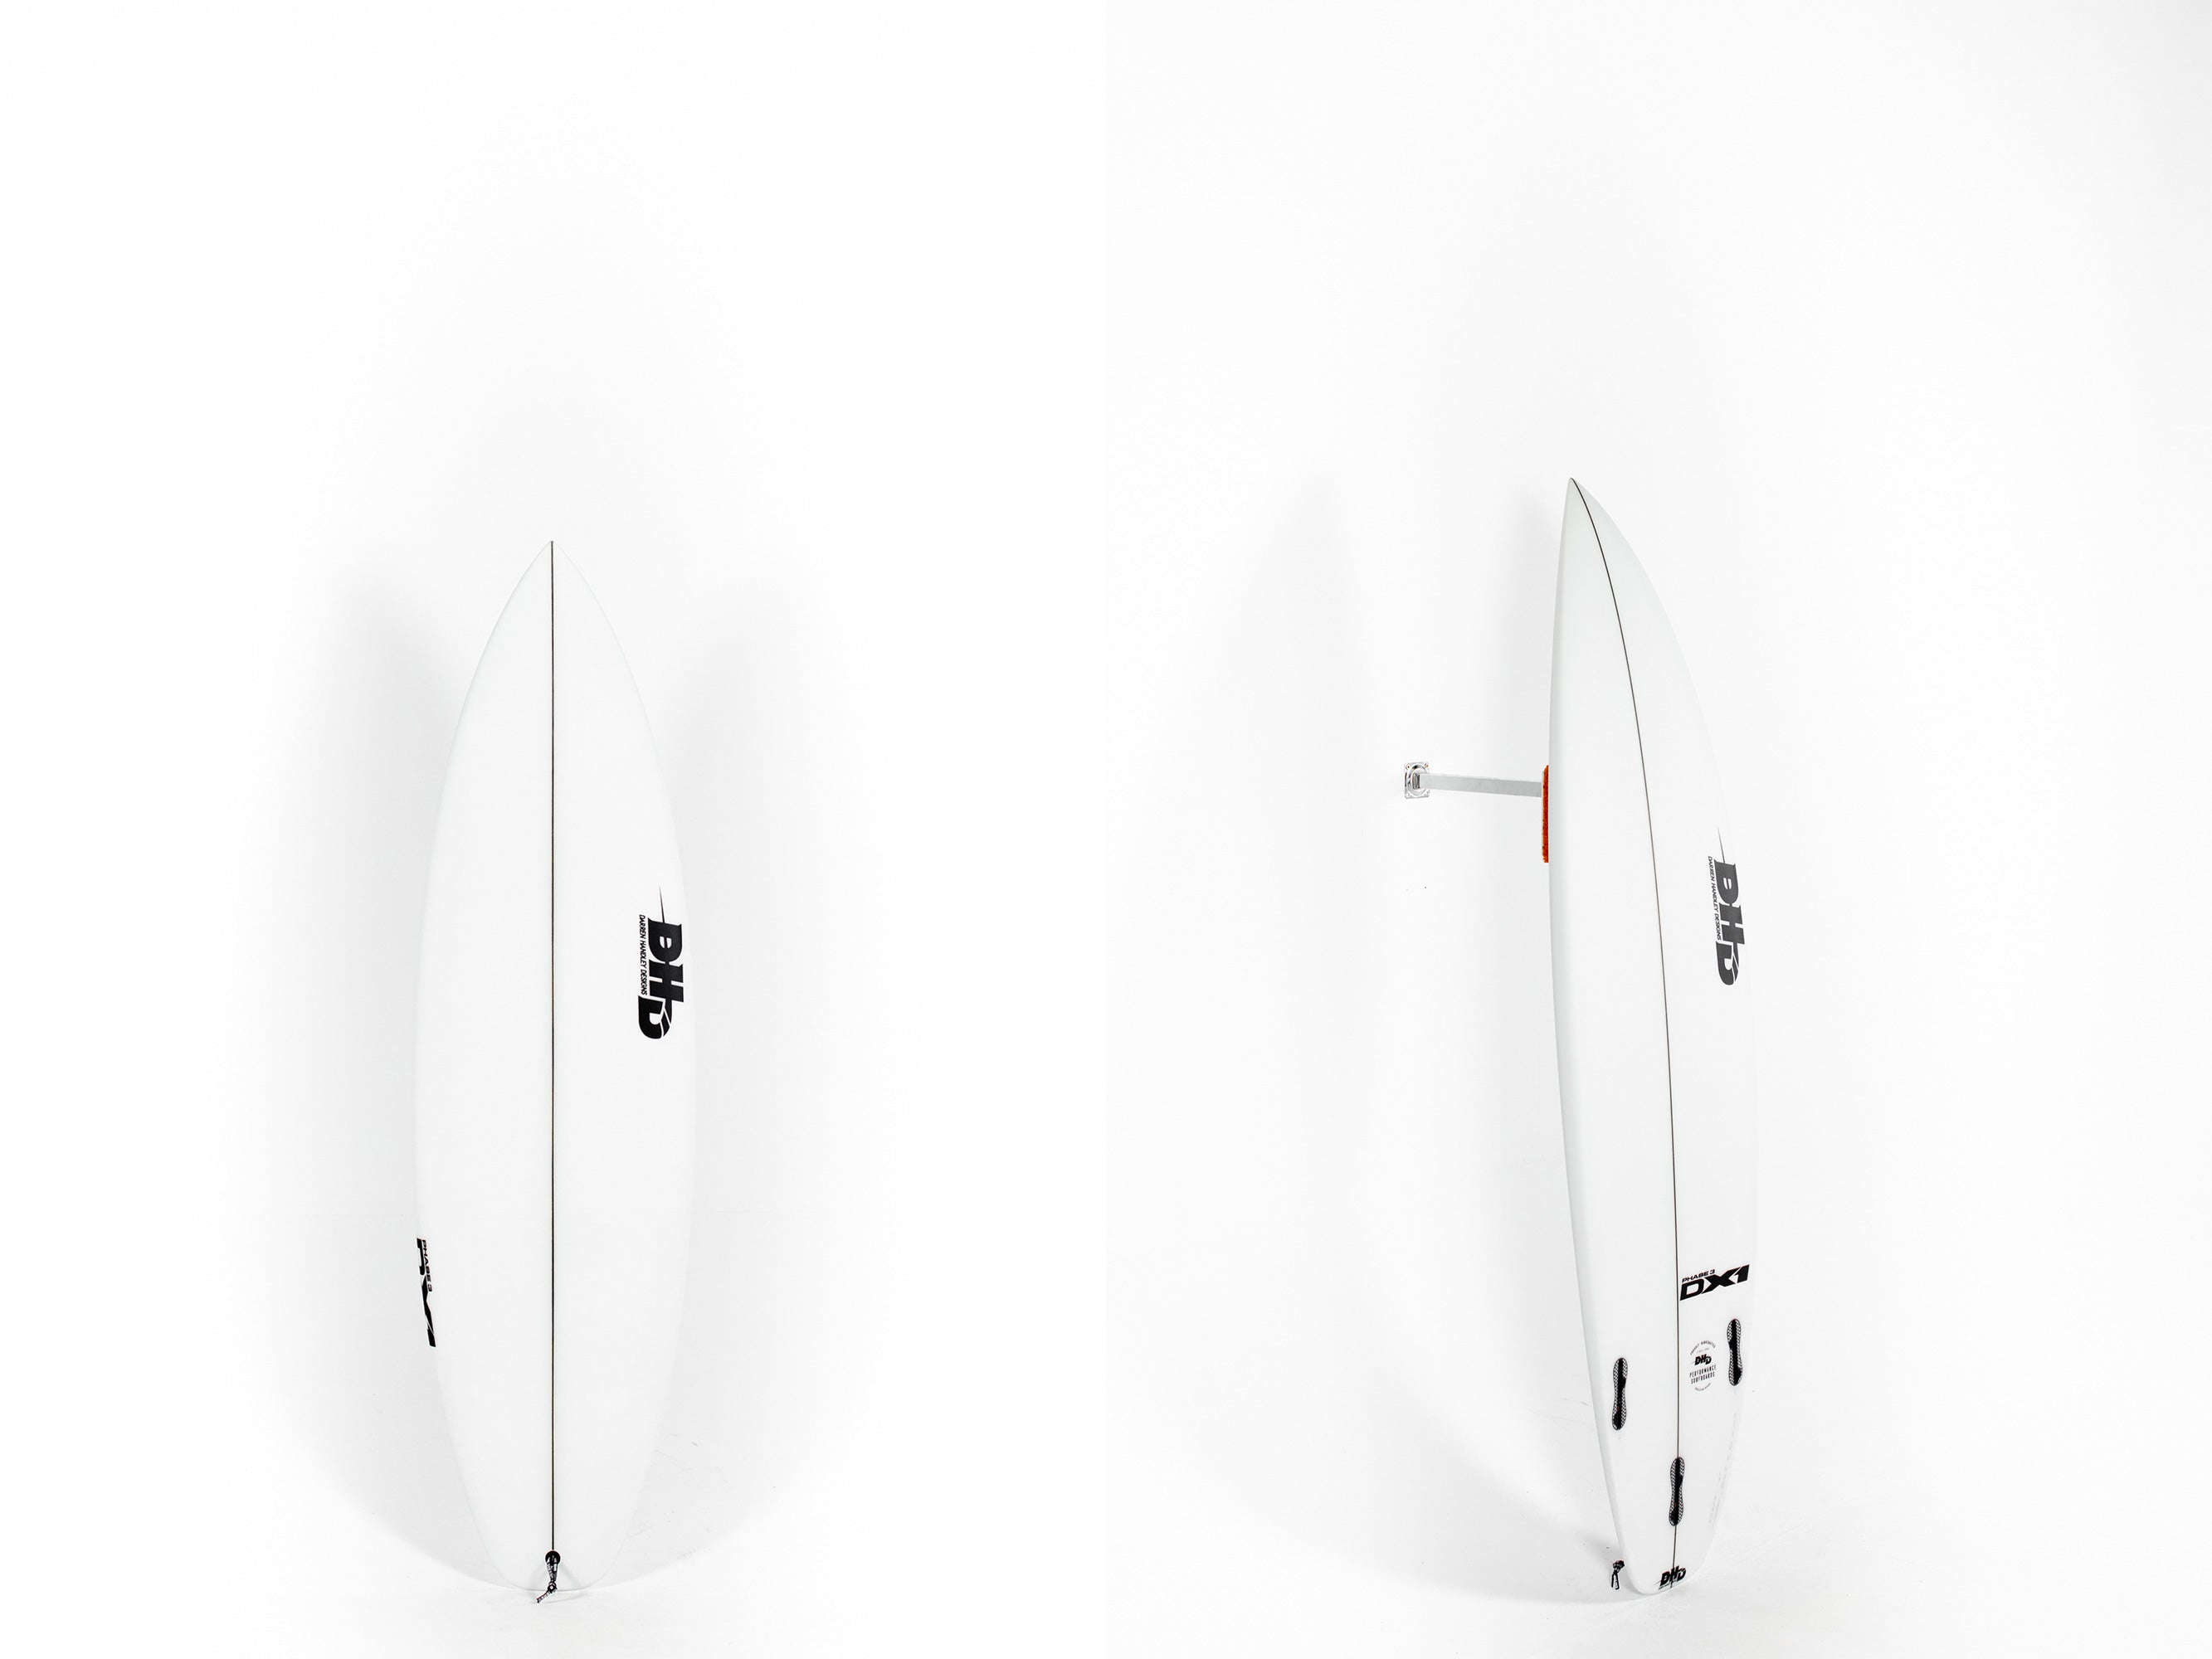 Pukas Surf Shop DHD Surfboards DX1 PHASE 3